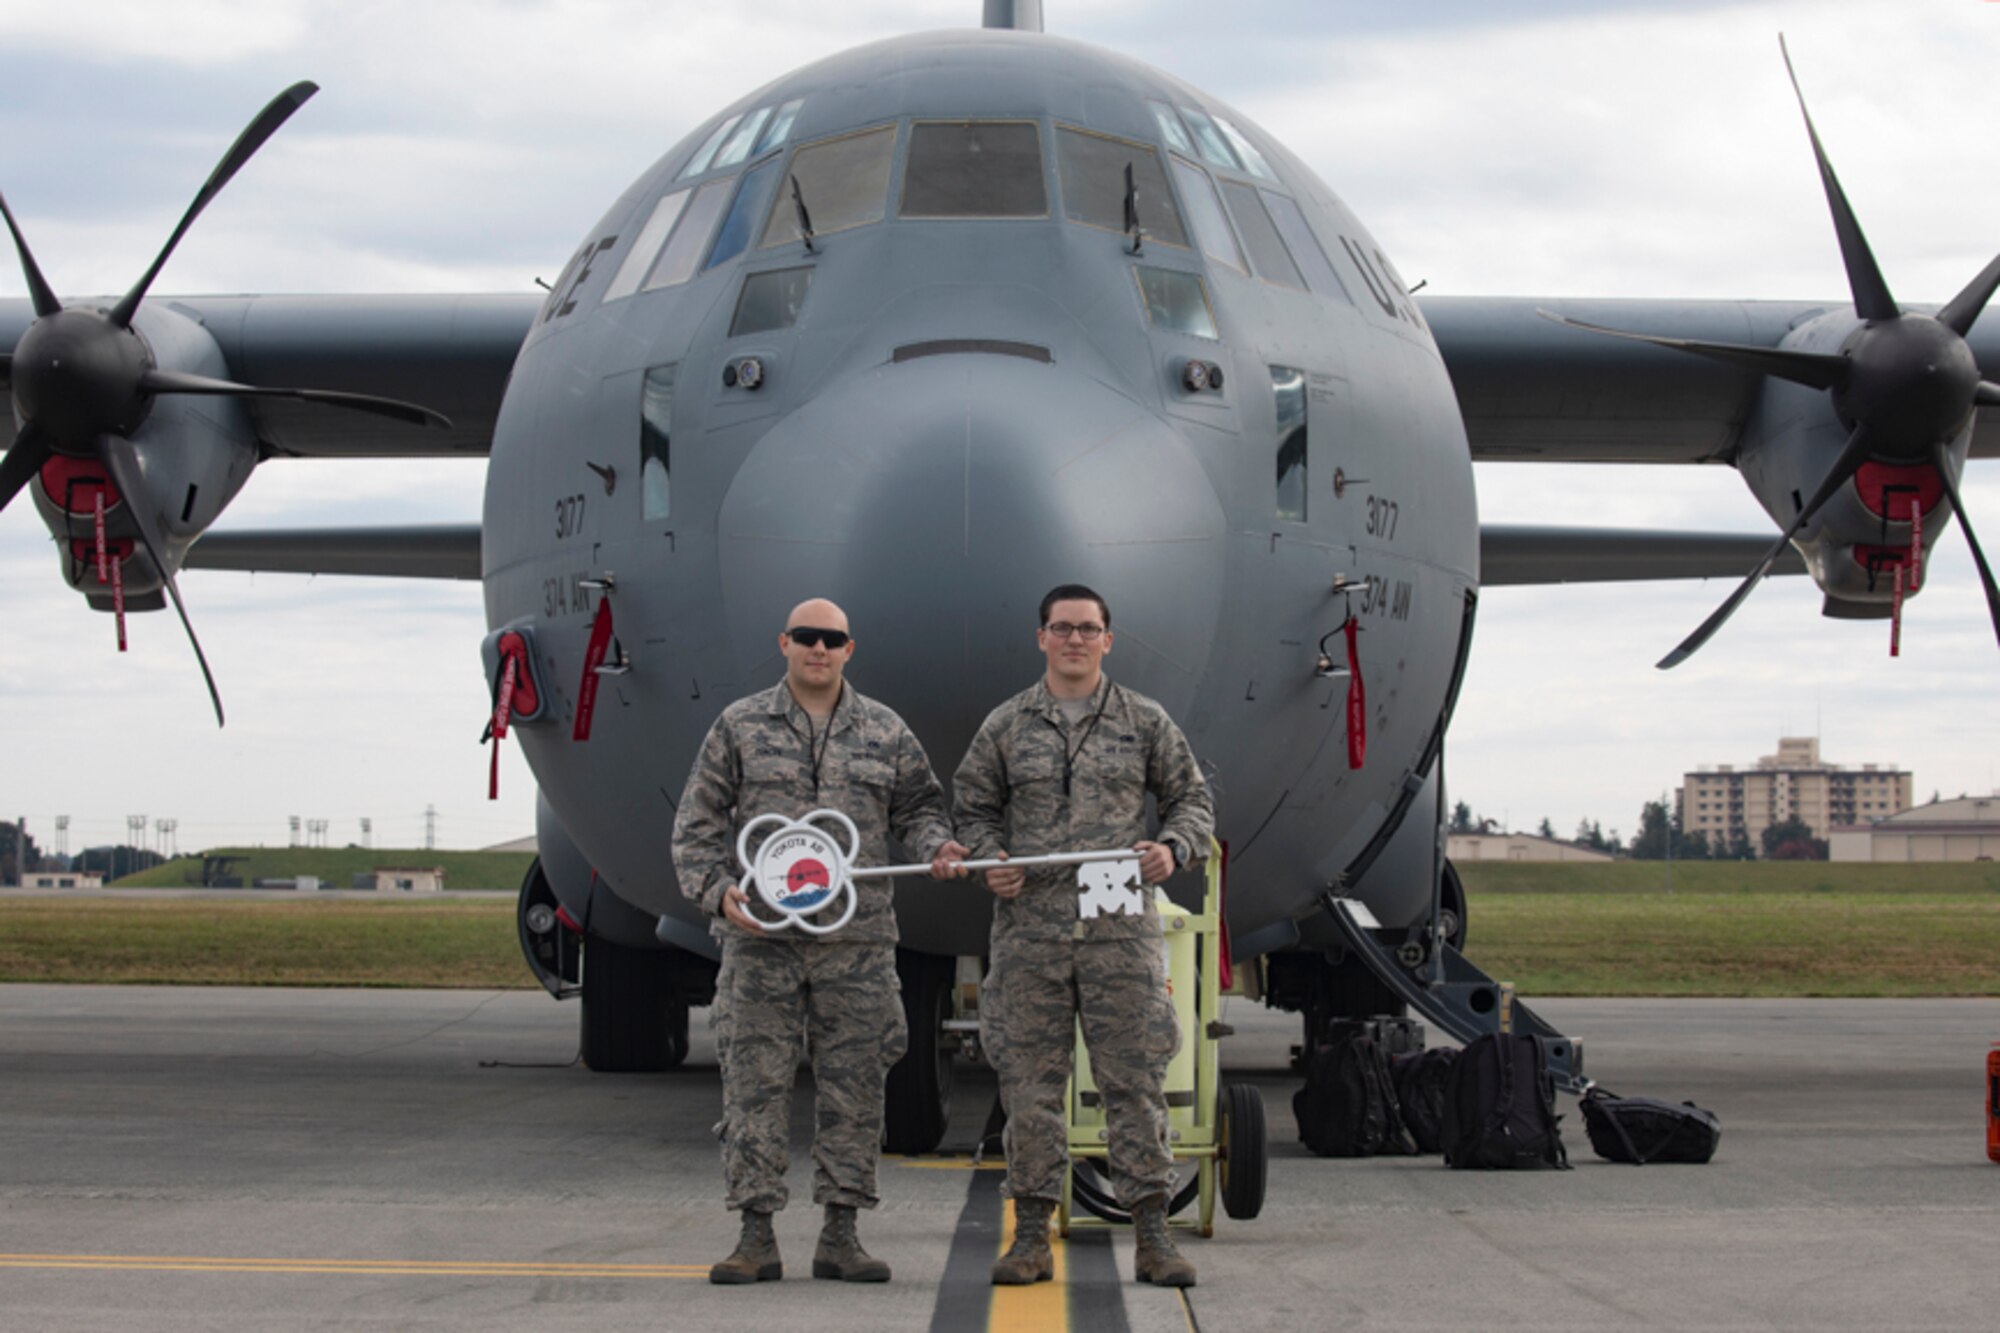 Staff Sgt. James Duncan and Senior Airman Ian Hall, both from the 374th Aircraft Maintenance Squadron crew chiefs, pose for a photo in front of a C-130J Super Hercules at Yokota Air Base,  Japan, Oct. 31, 2017. This is the sixth C-130J delivered to Yokota and the first from Dyess Air Force Base, Texas, as part of fleet-wide redistribution of assets set in motion by Air Mobility Command.